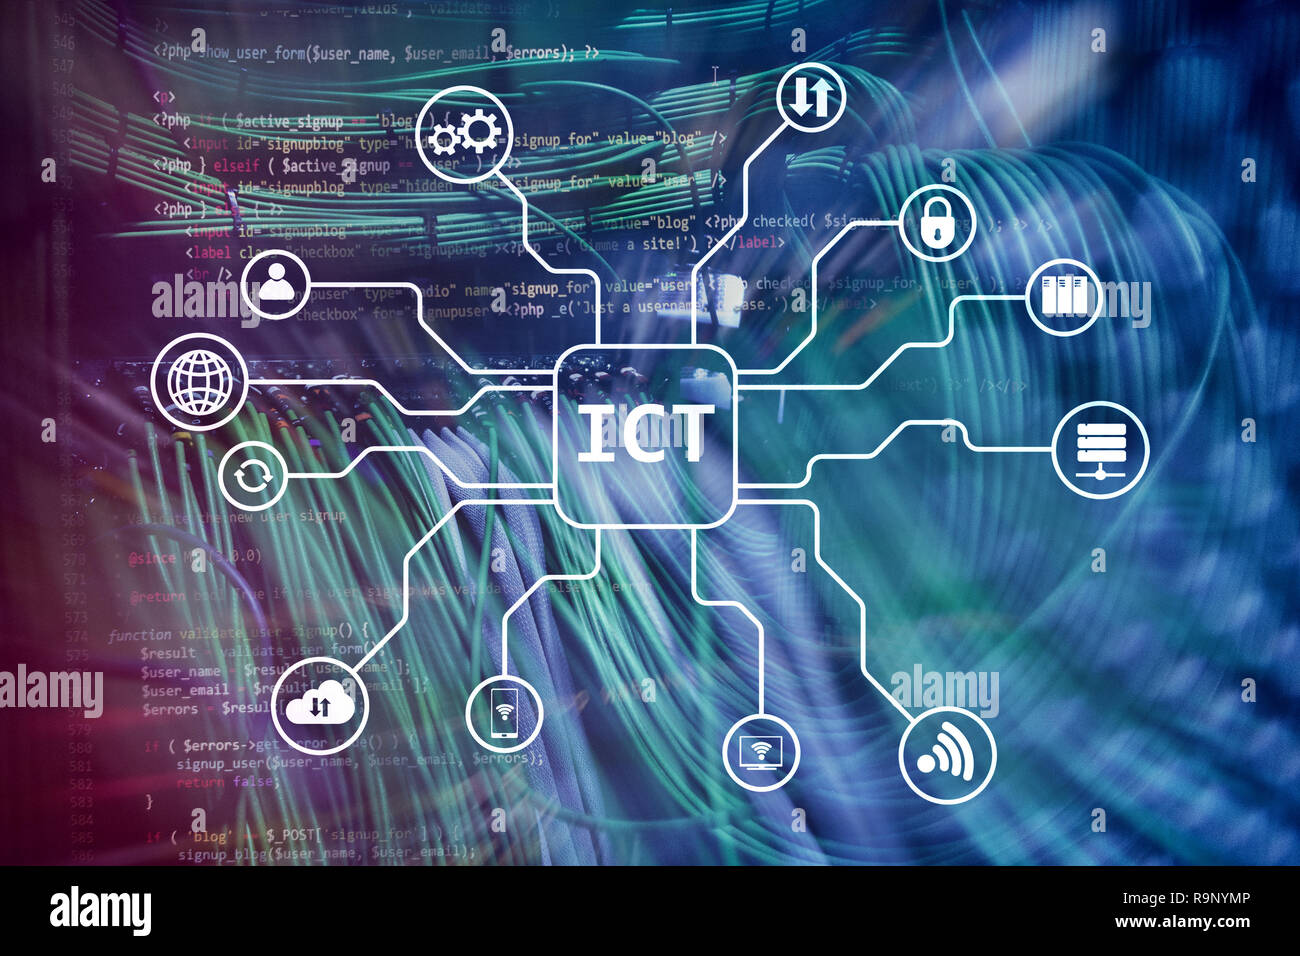 ICT - information and communications technology concept on server room background. Stock Photo